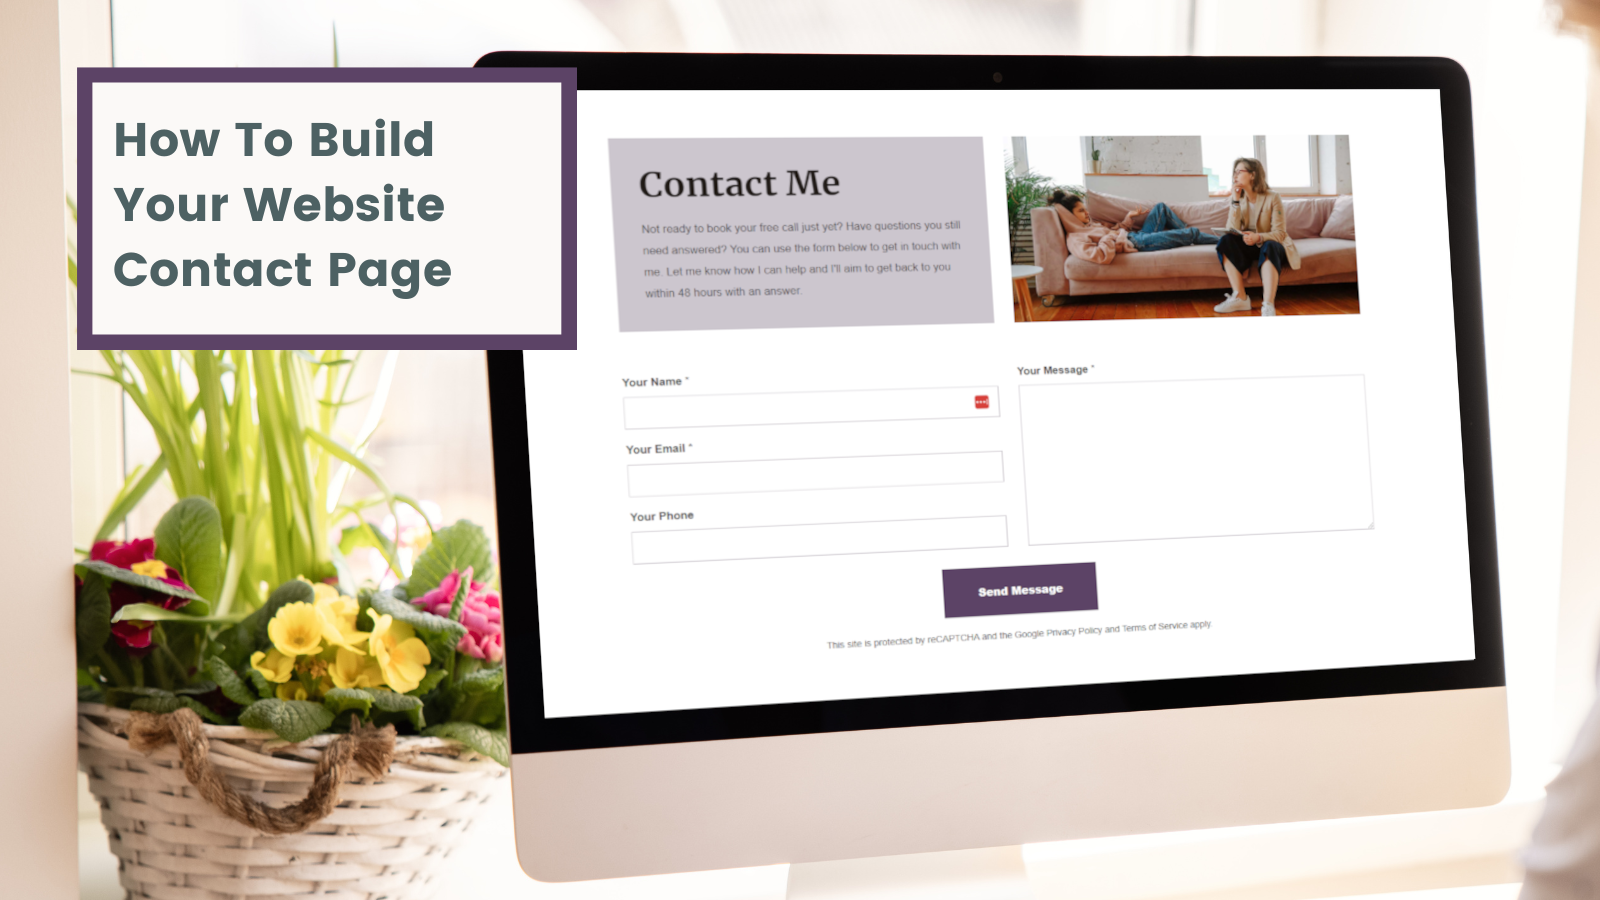 How To Build Your Website Contact Page